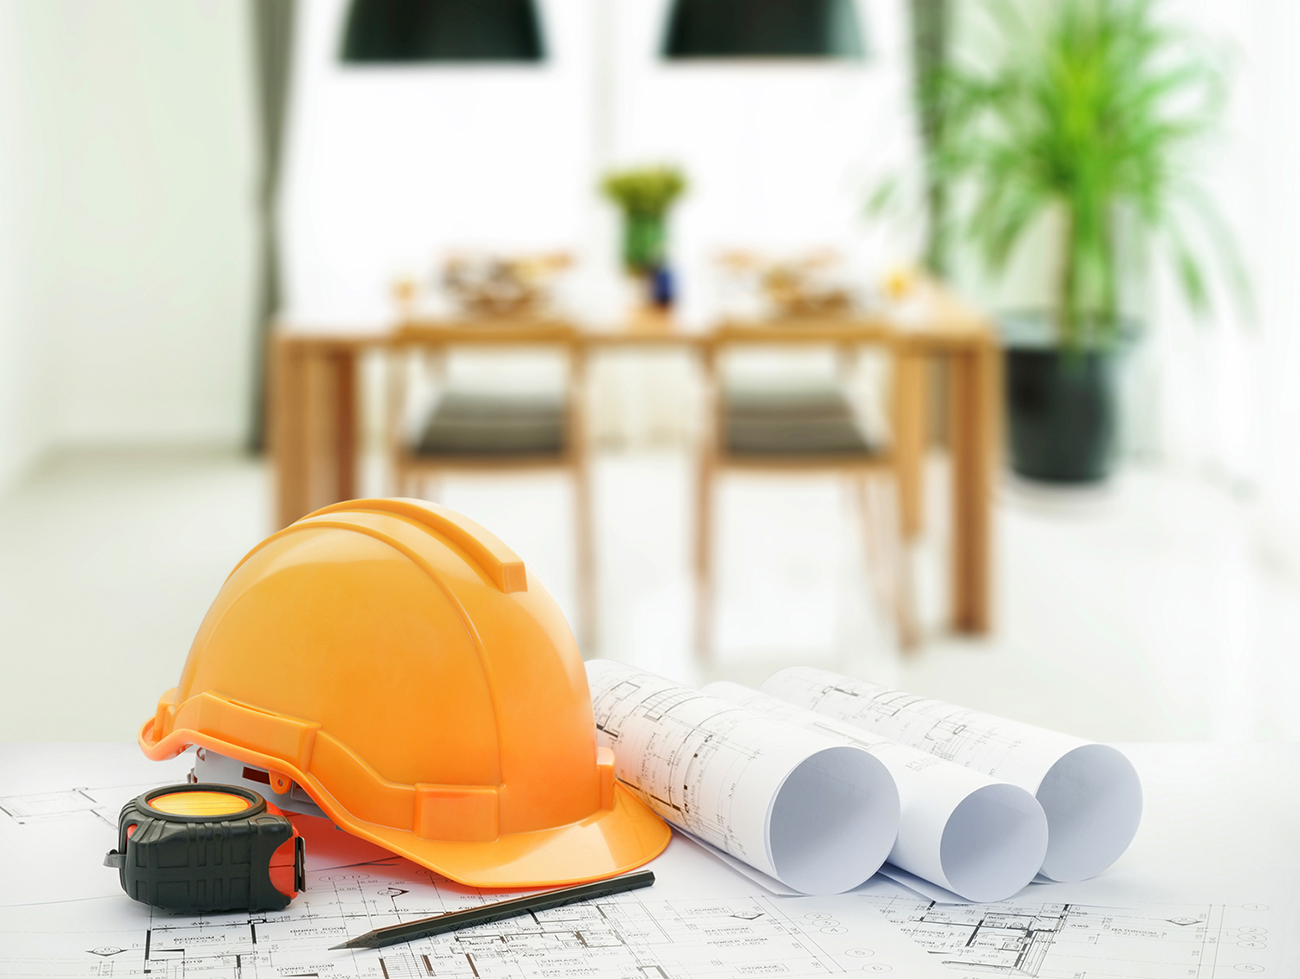 A Civil engineer's architectural blueprints with safety helmet and tools with home Interior background  